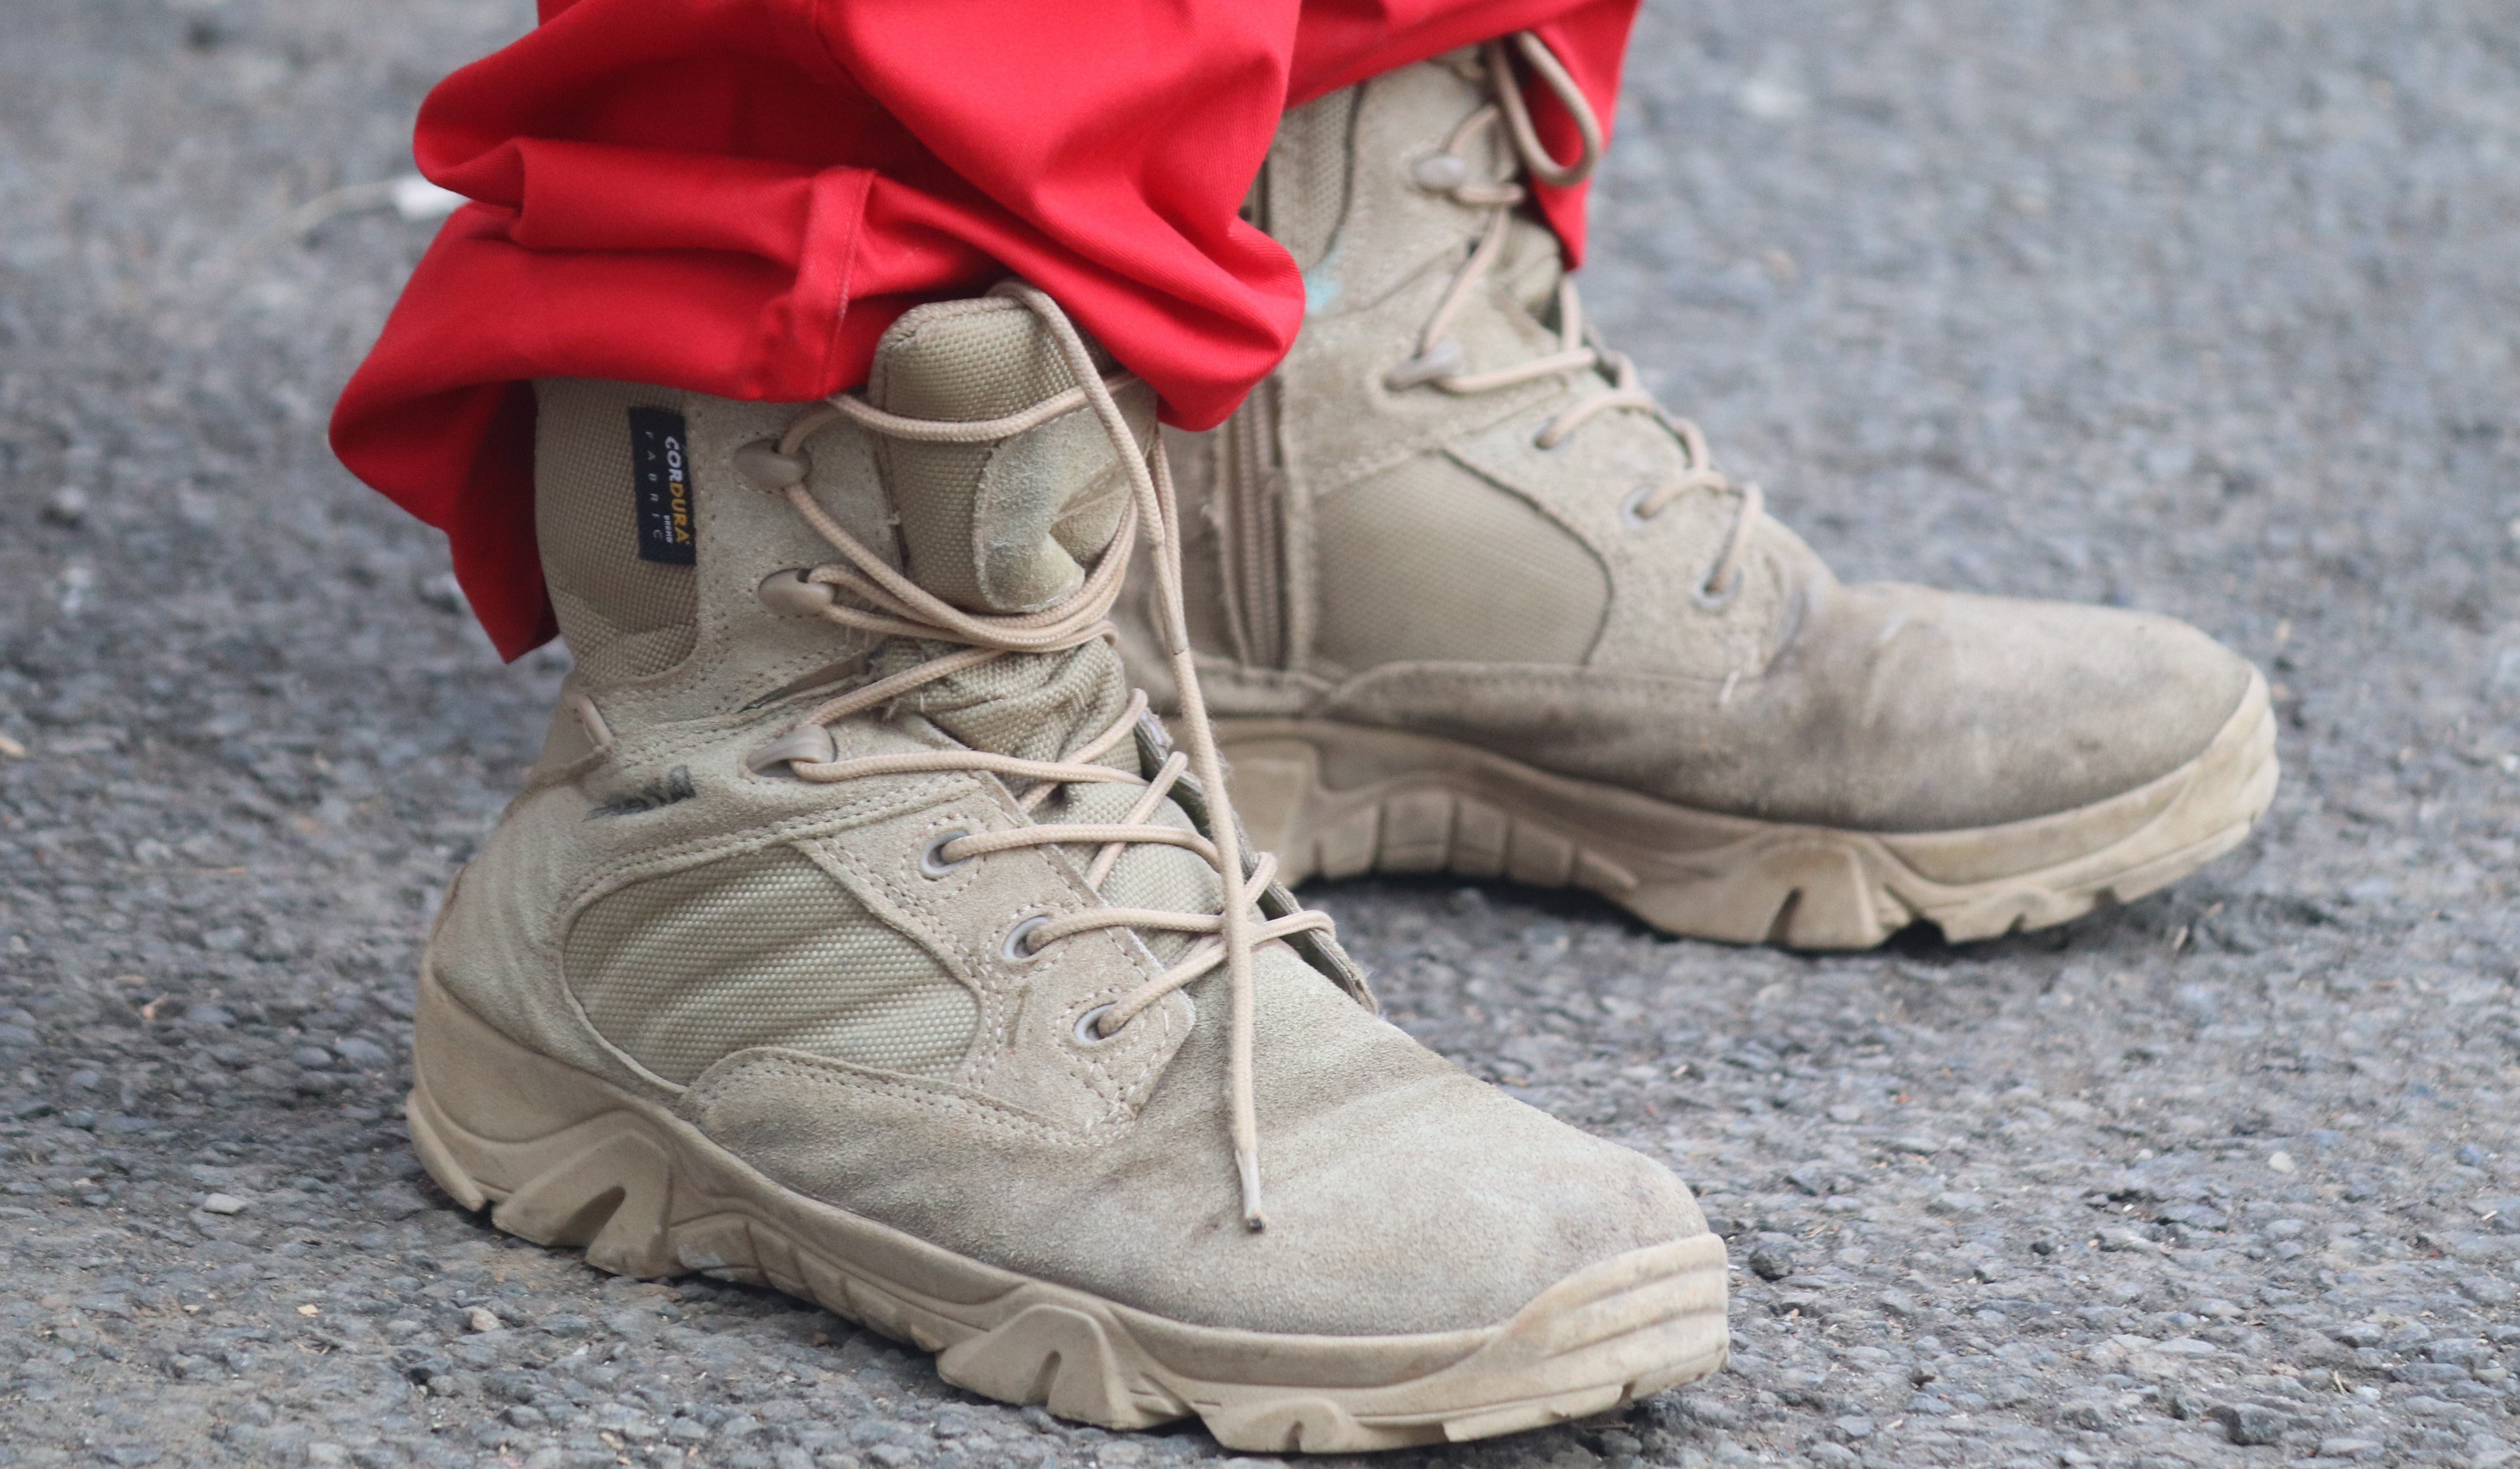 Safety Shoes Guide: Types & Importance ⋆ PPE-ONLINE